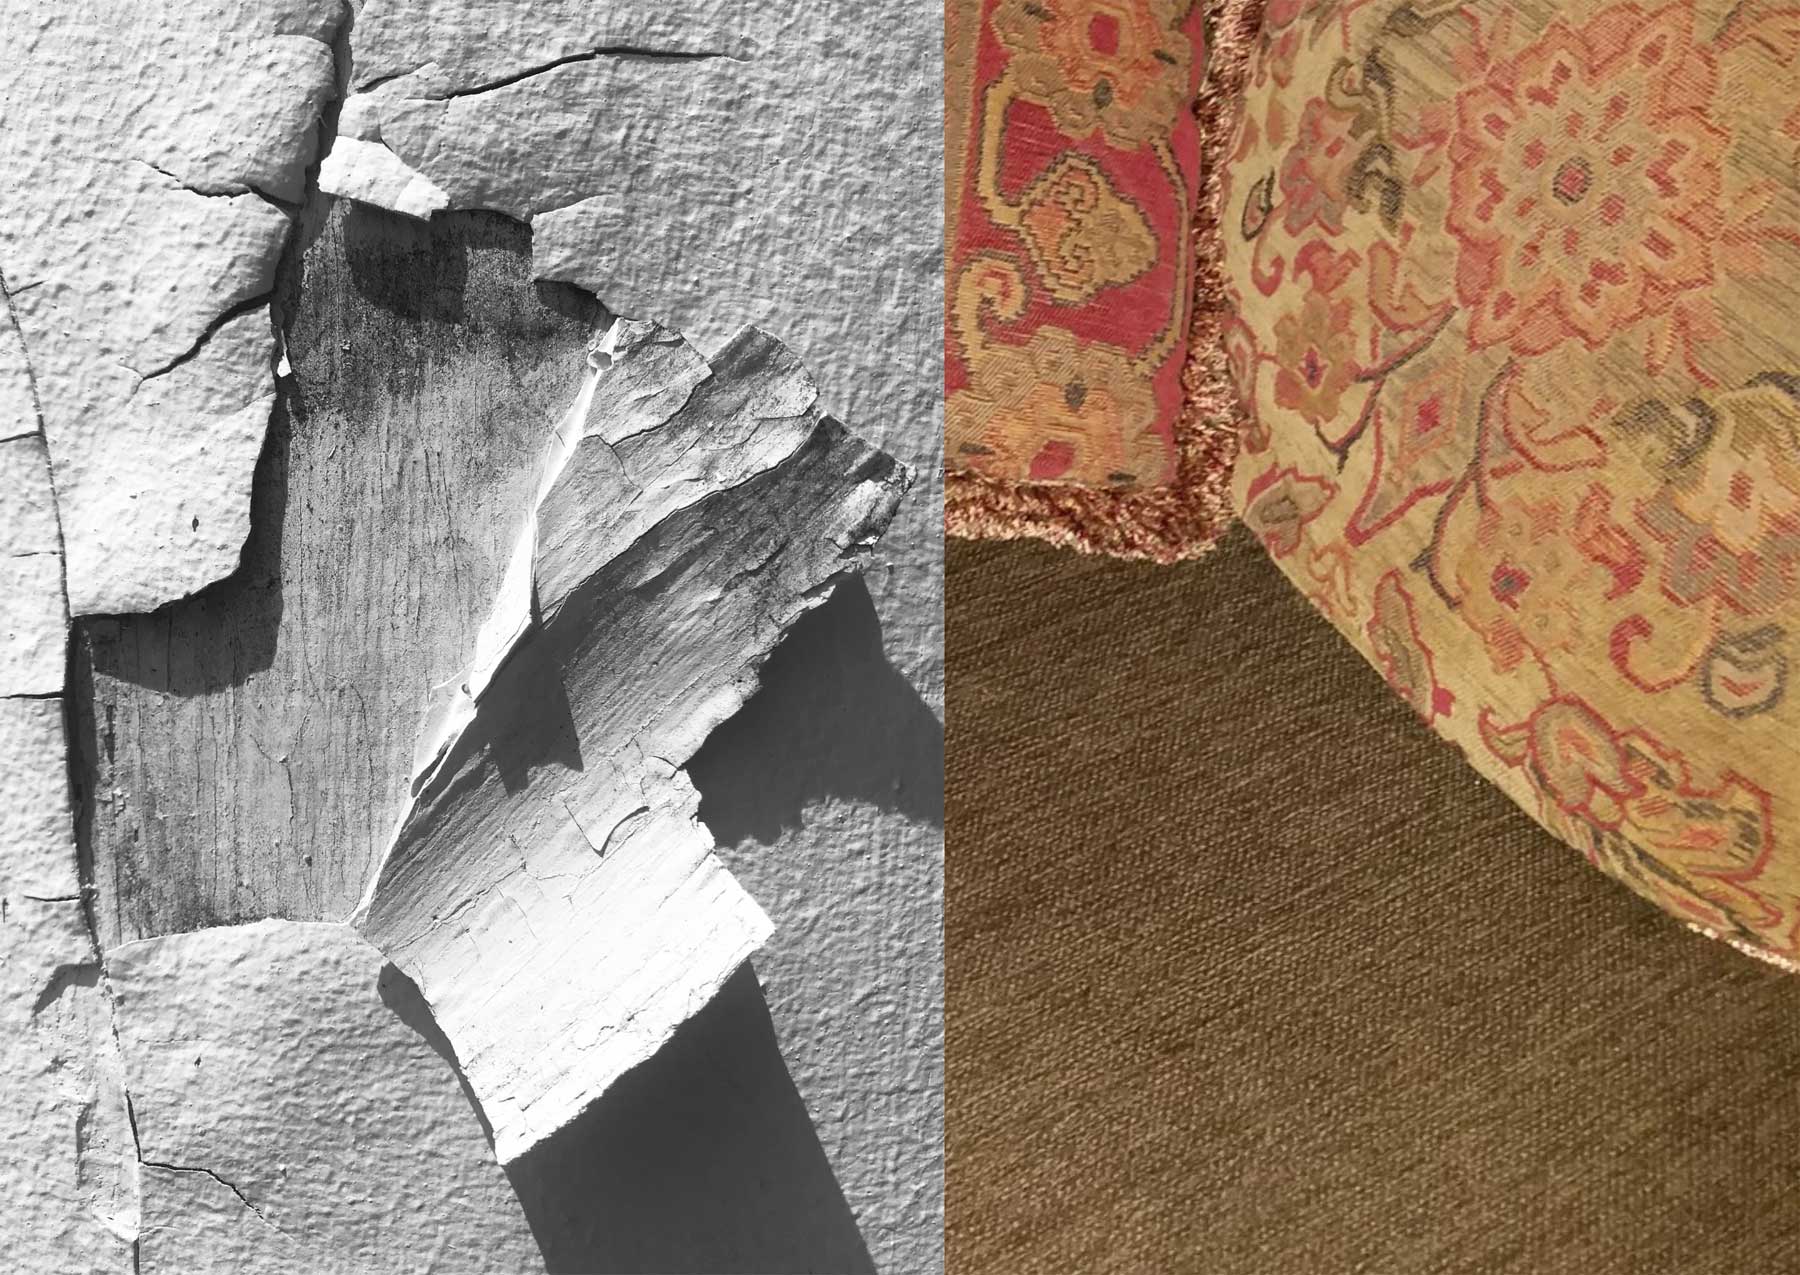 photos made by mother and daughter, one showing a broken floor, the other a floor and the bottom of a quilt